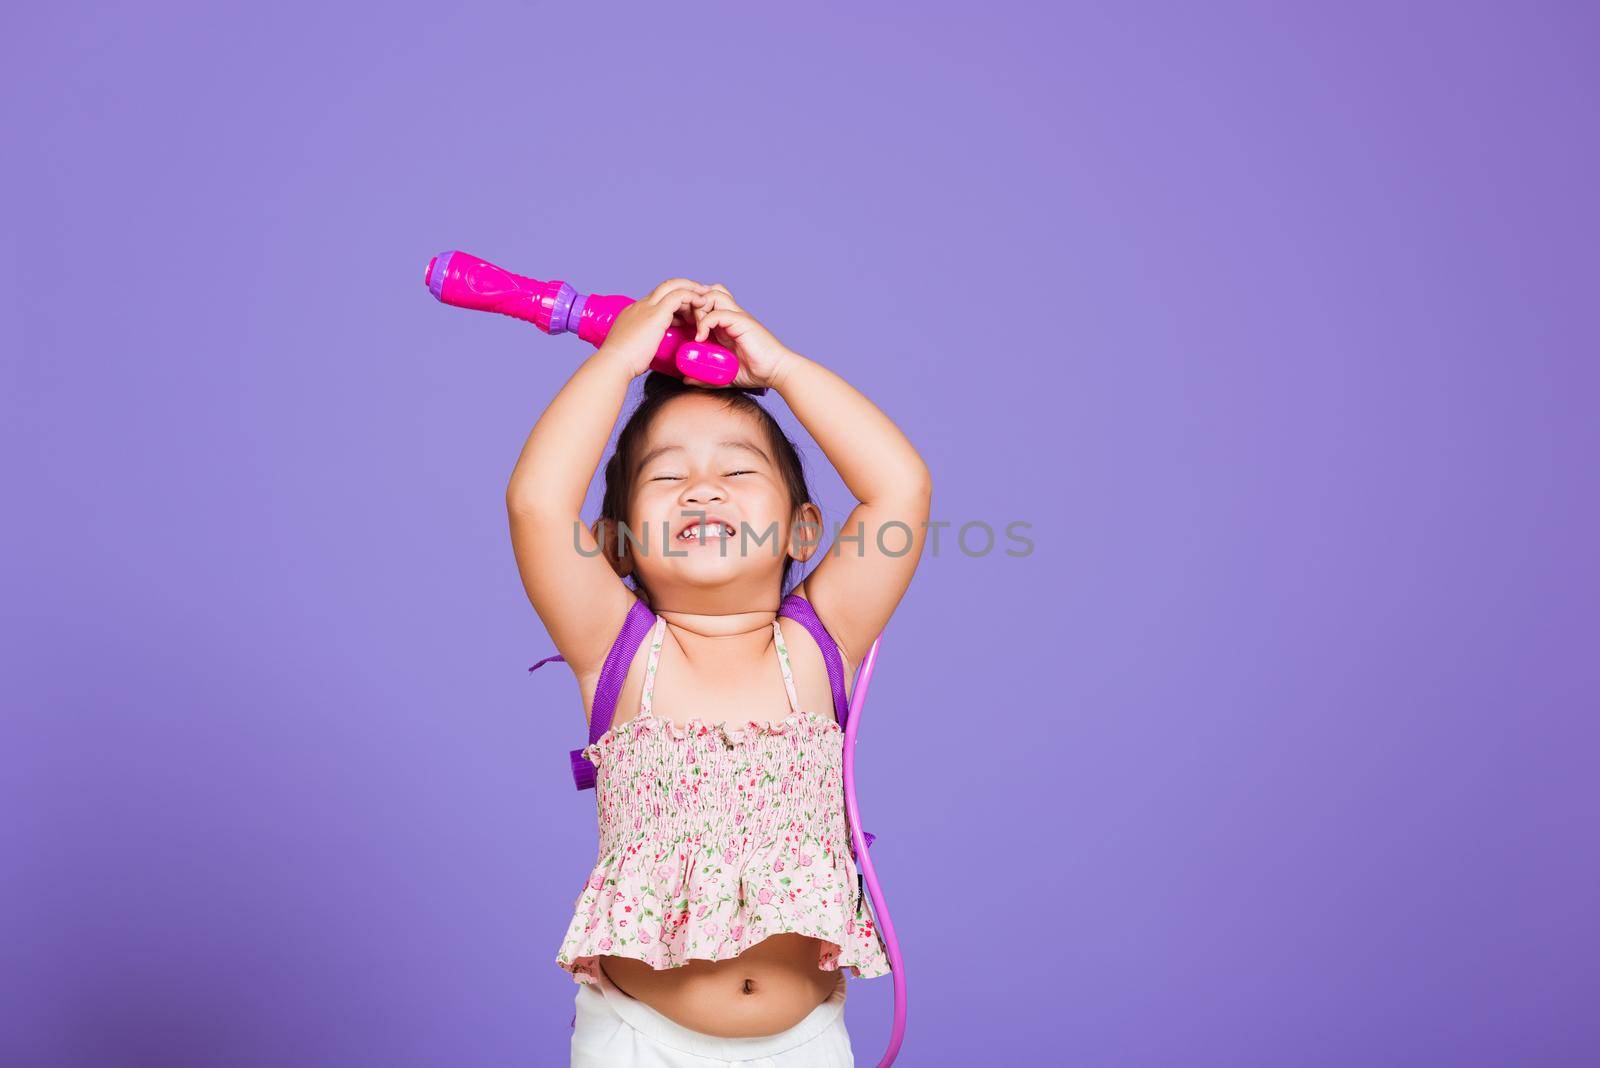 Thai child funny hold toy water pistol and smile, Happy Asian little girl holding plastic water gun, studio shot isolated on purple background, Thailand Songkran festival day national culture concept